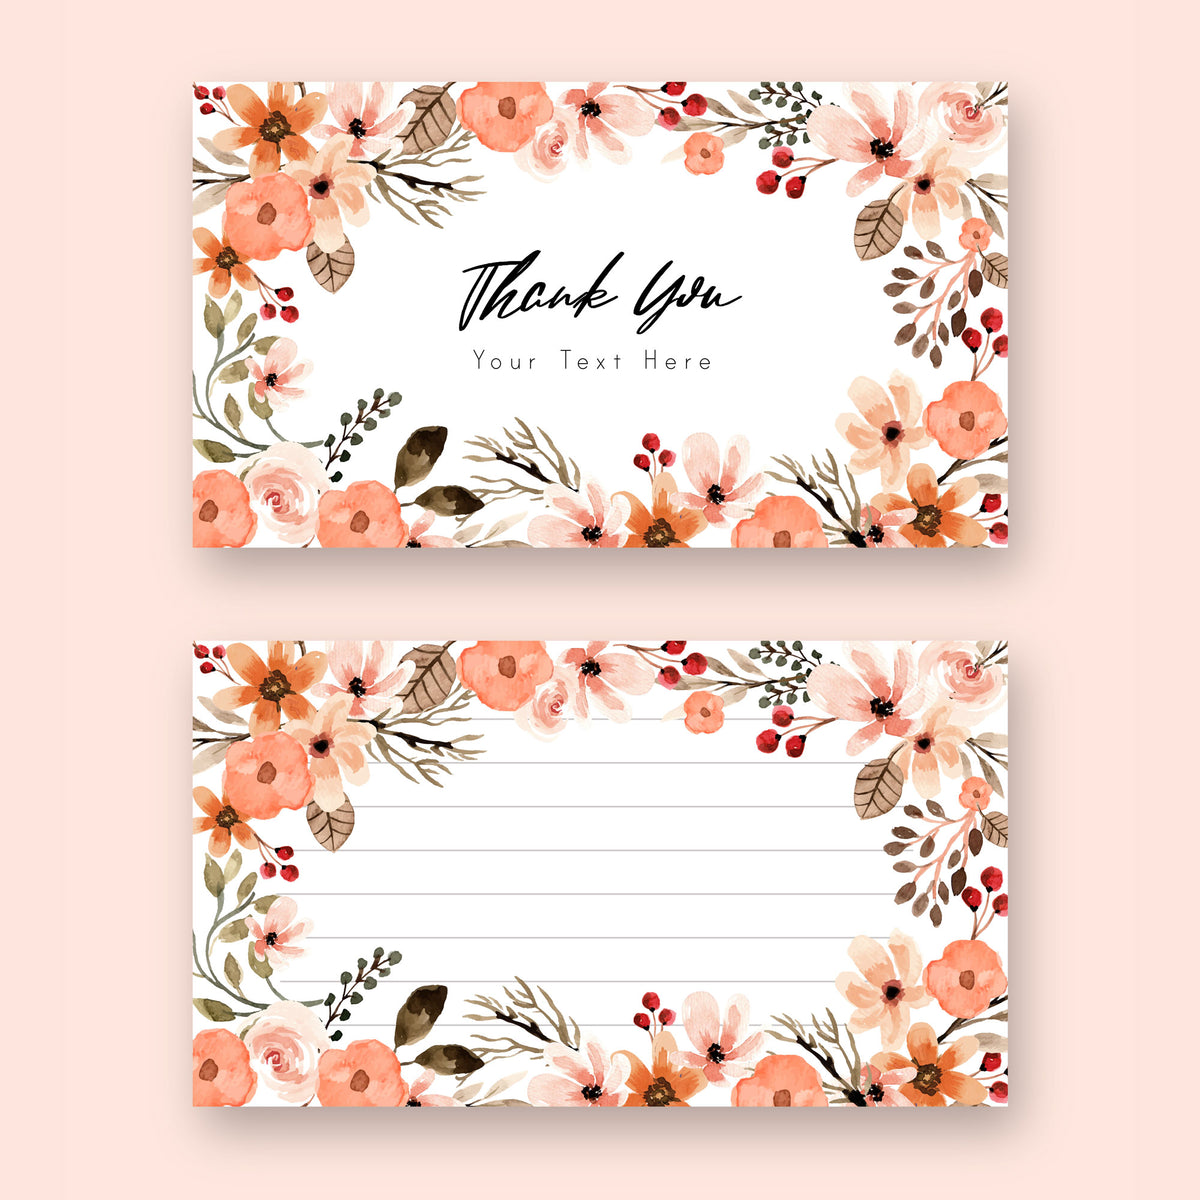 Plantable Terracotta Floral Thank You Cards - Set of 100